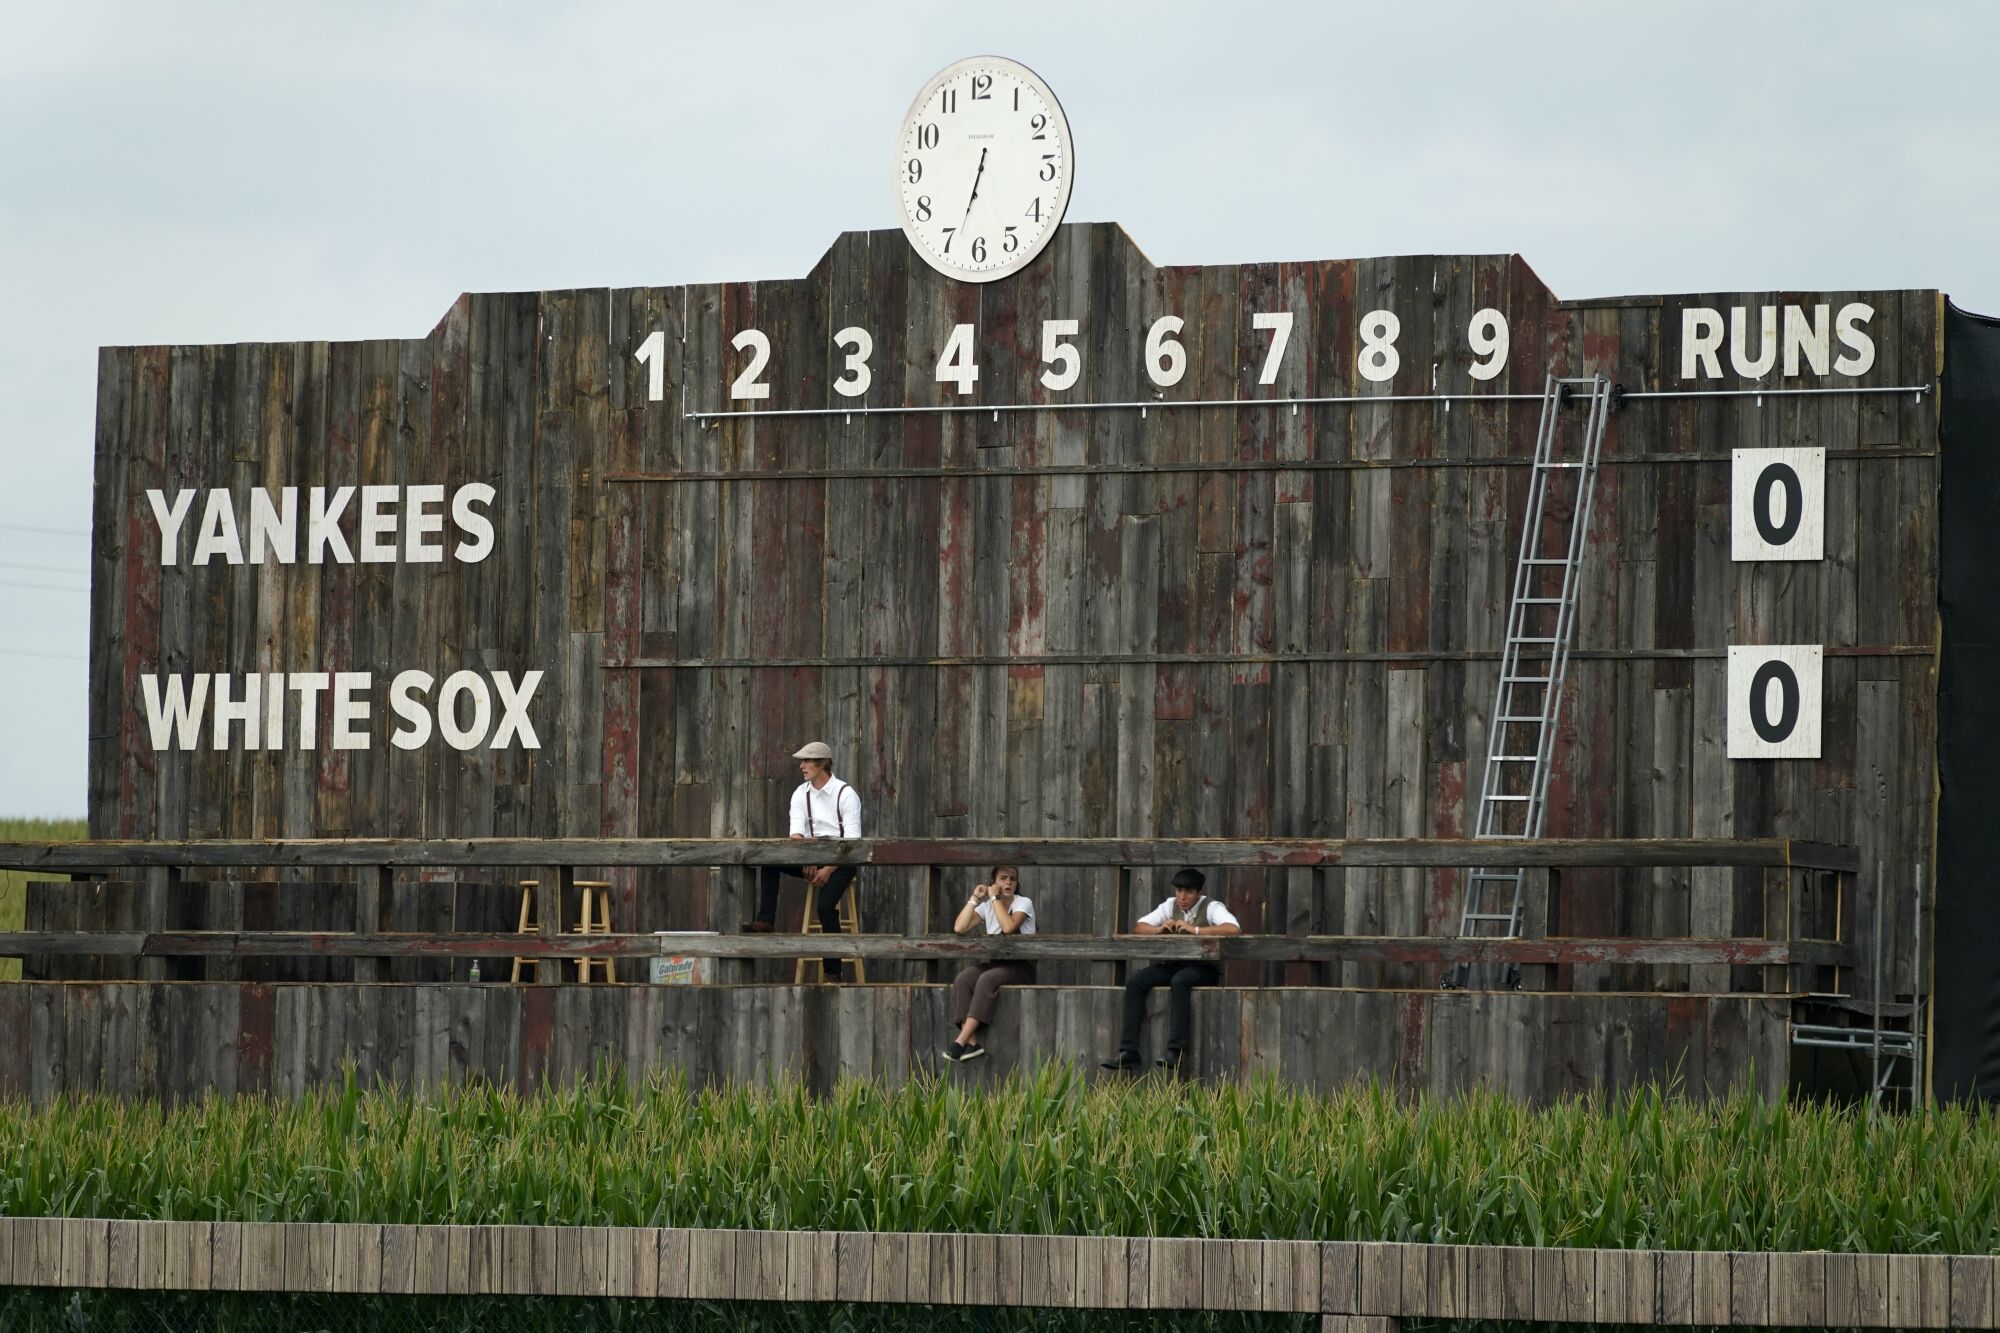 The old-timey scoreboard is shown in the outfield.